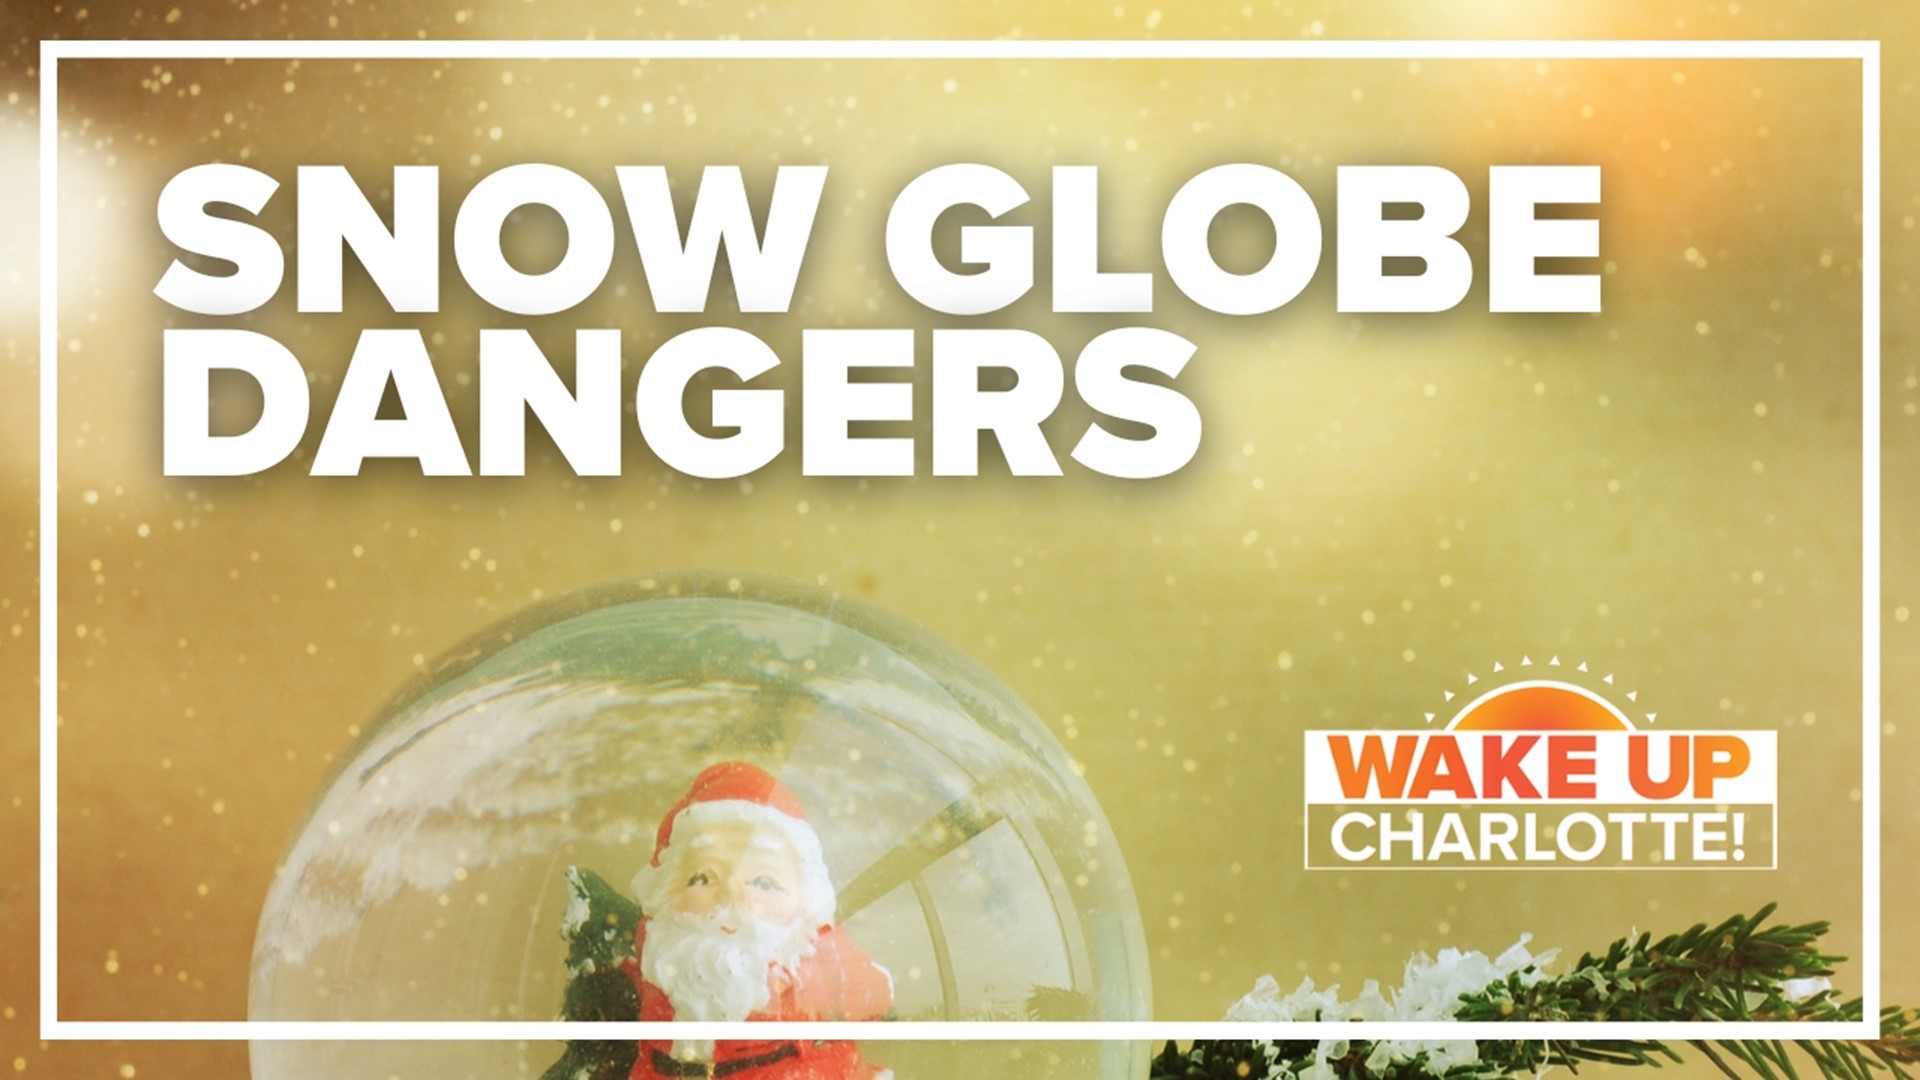 We verify whether snow globes are dangerous decorations and who they're dangerous to.